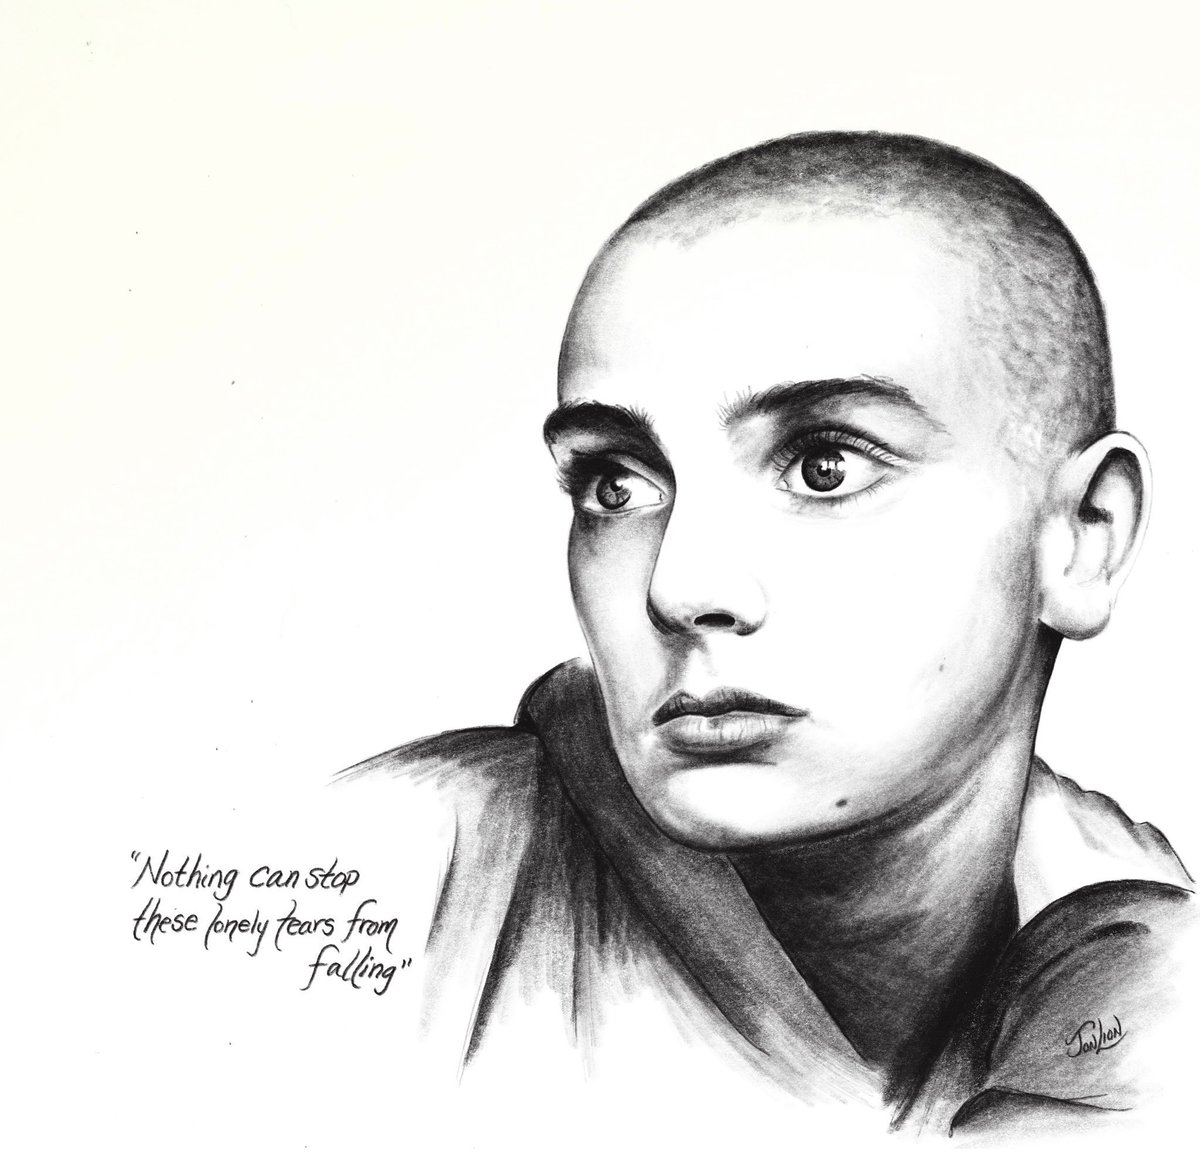 Sunday SALE My 16x20 Sinead O’Connor charcoal drawing is ON SALE at $350 DM me💜